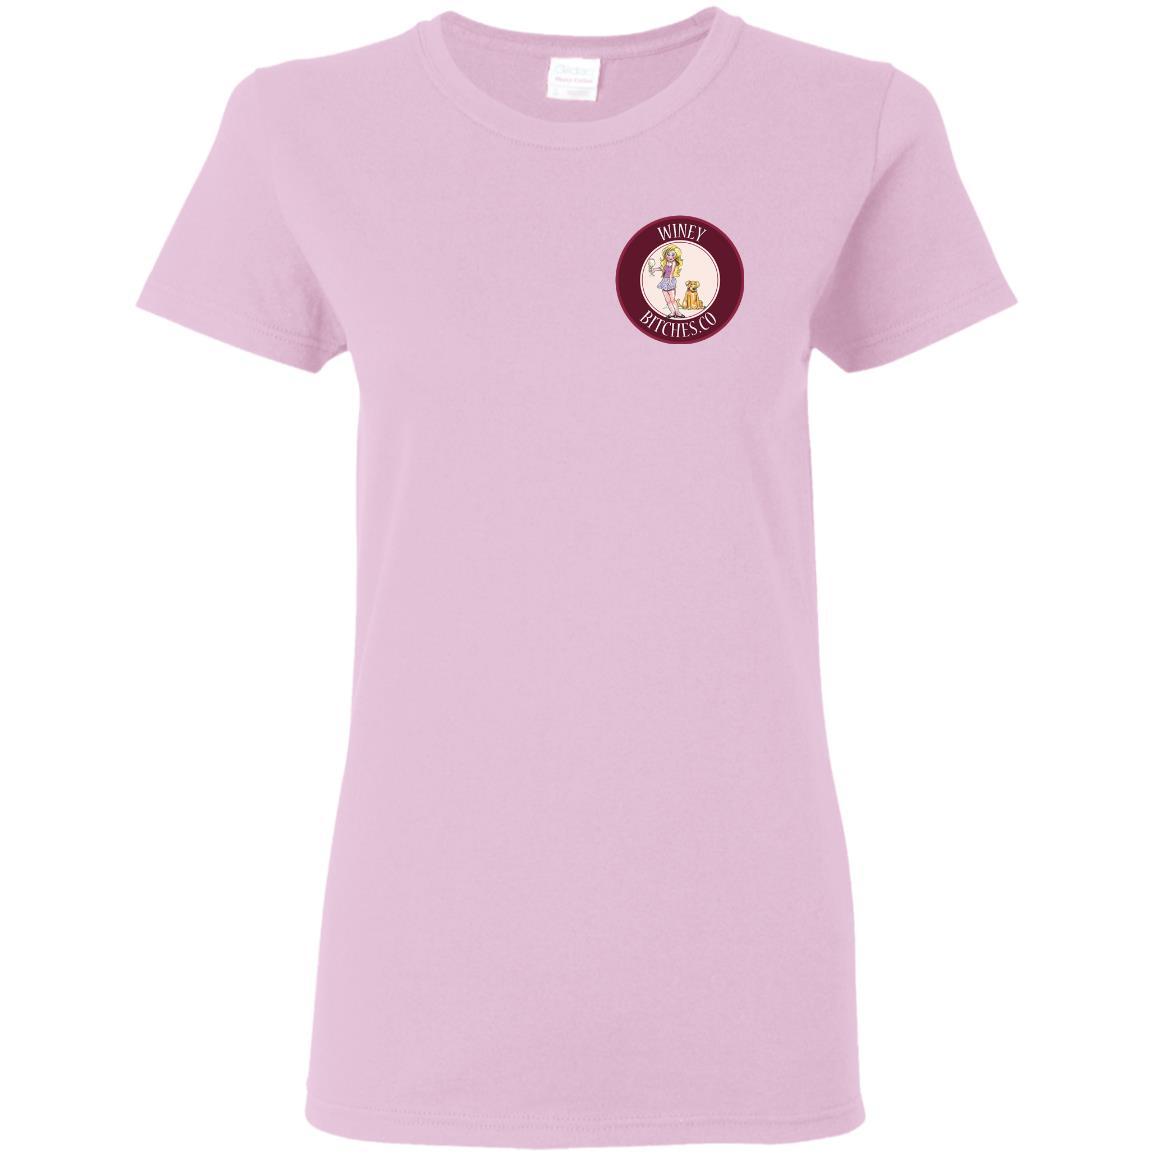 T-Shirts Light Pink / S WineyBitches.co Hilariously Funny "Count Me In" Ladies T-Shirt for Wine & Dog Lovers WineyBitchesCo